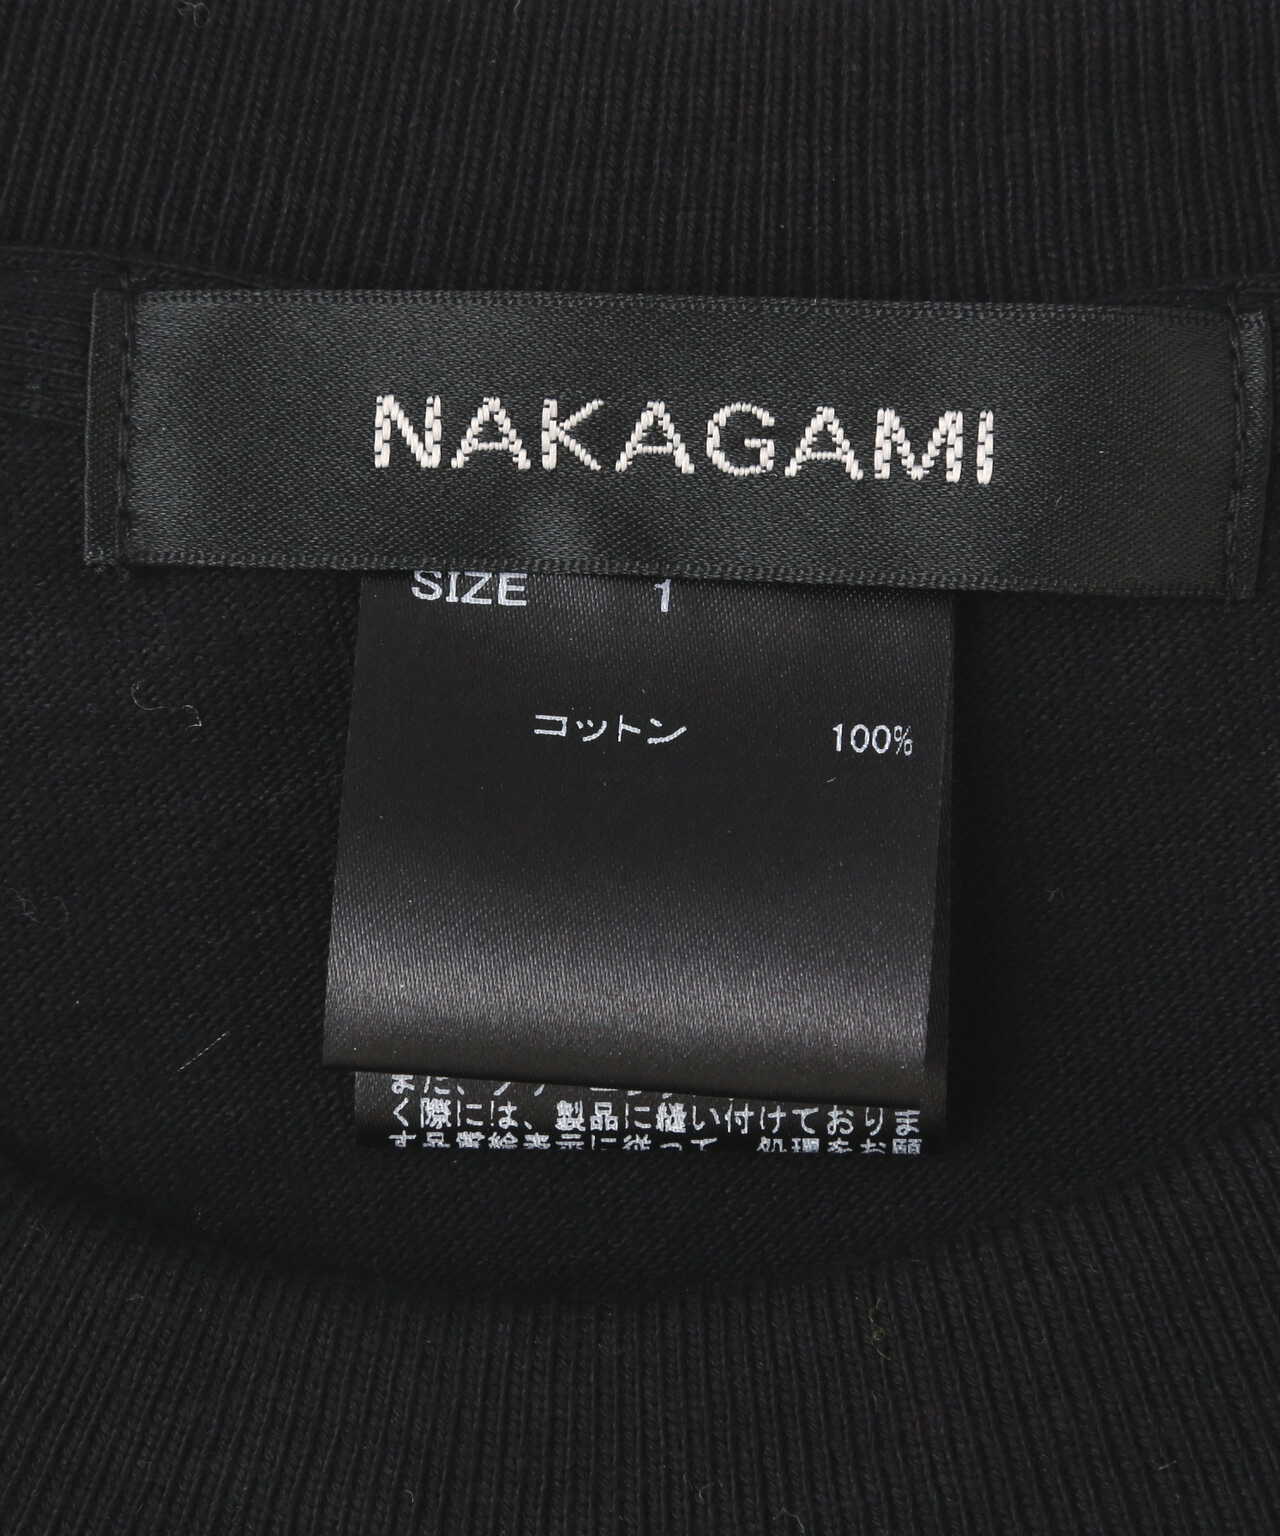 NAKAGAMI(ナカガミ) 別注NOW HERE LONG SLEEVE Tシャツ | B'2nd ( ビー